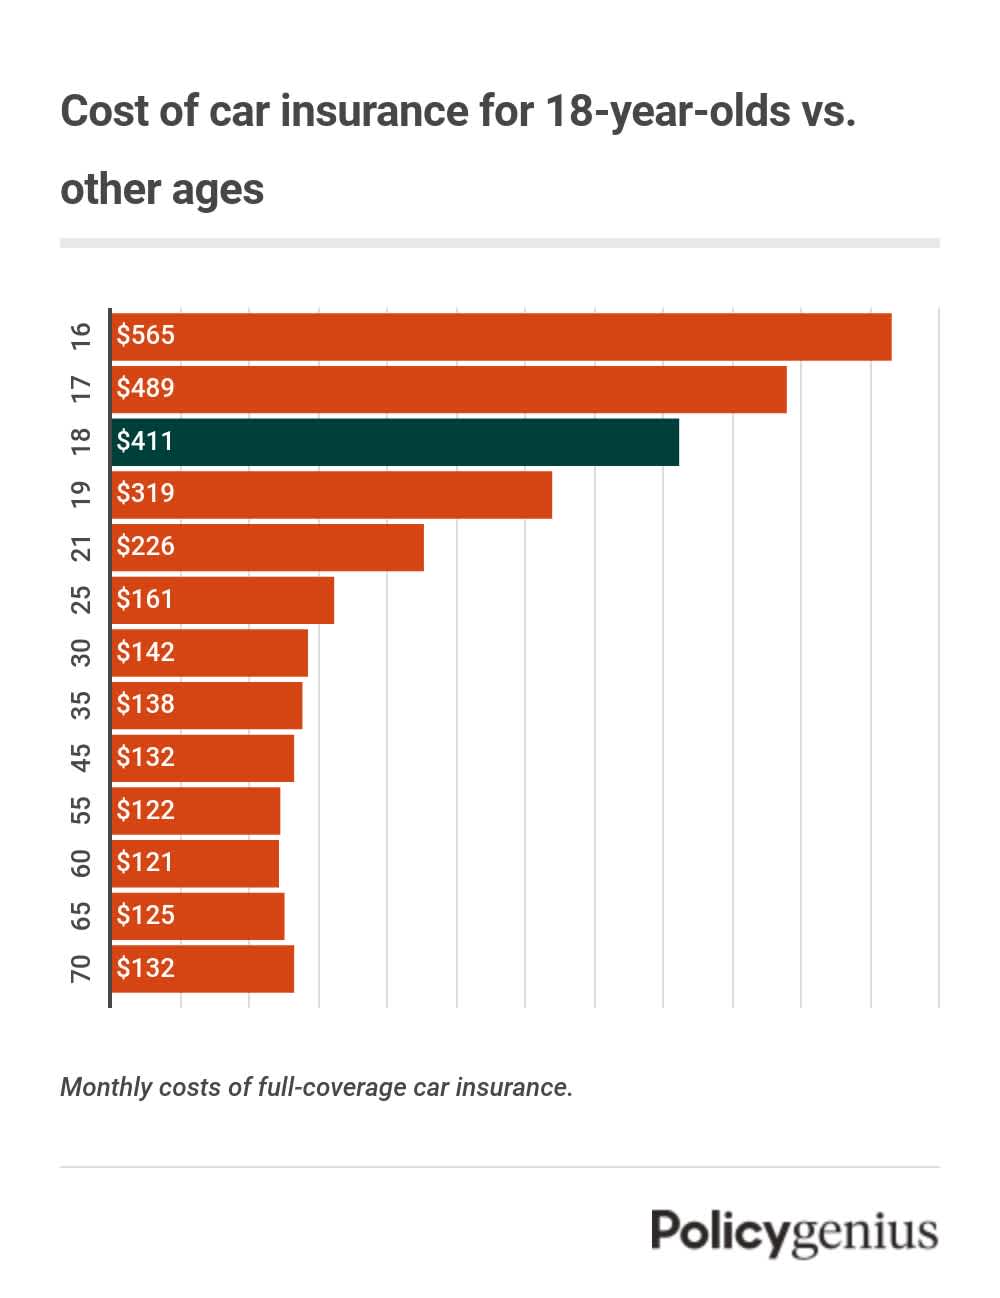 A graph showing the cost of car insurance for 18-year-olds compared to other ages.